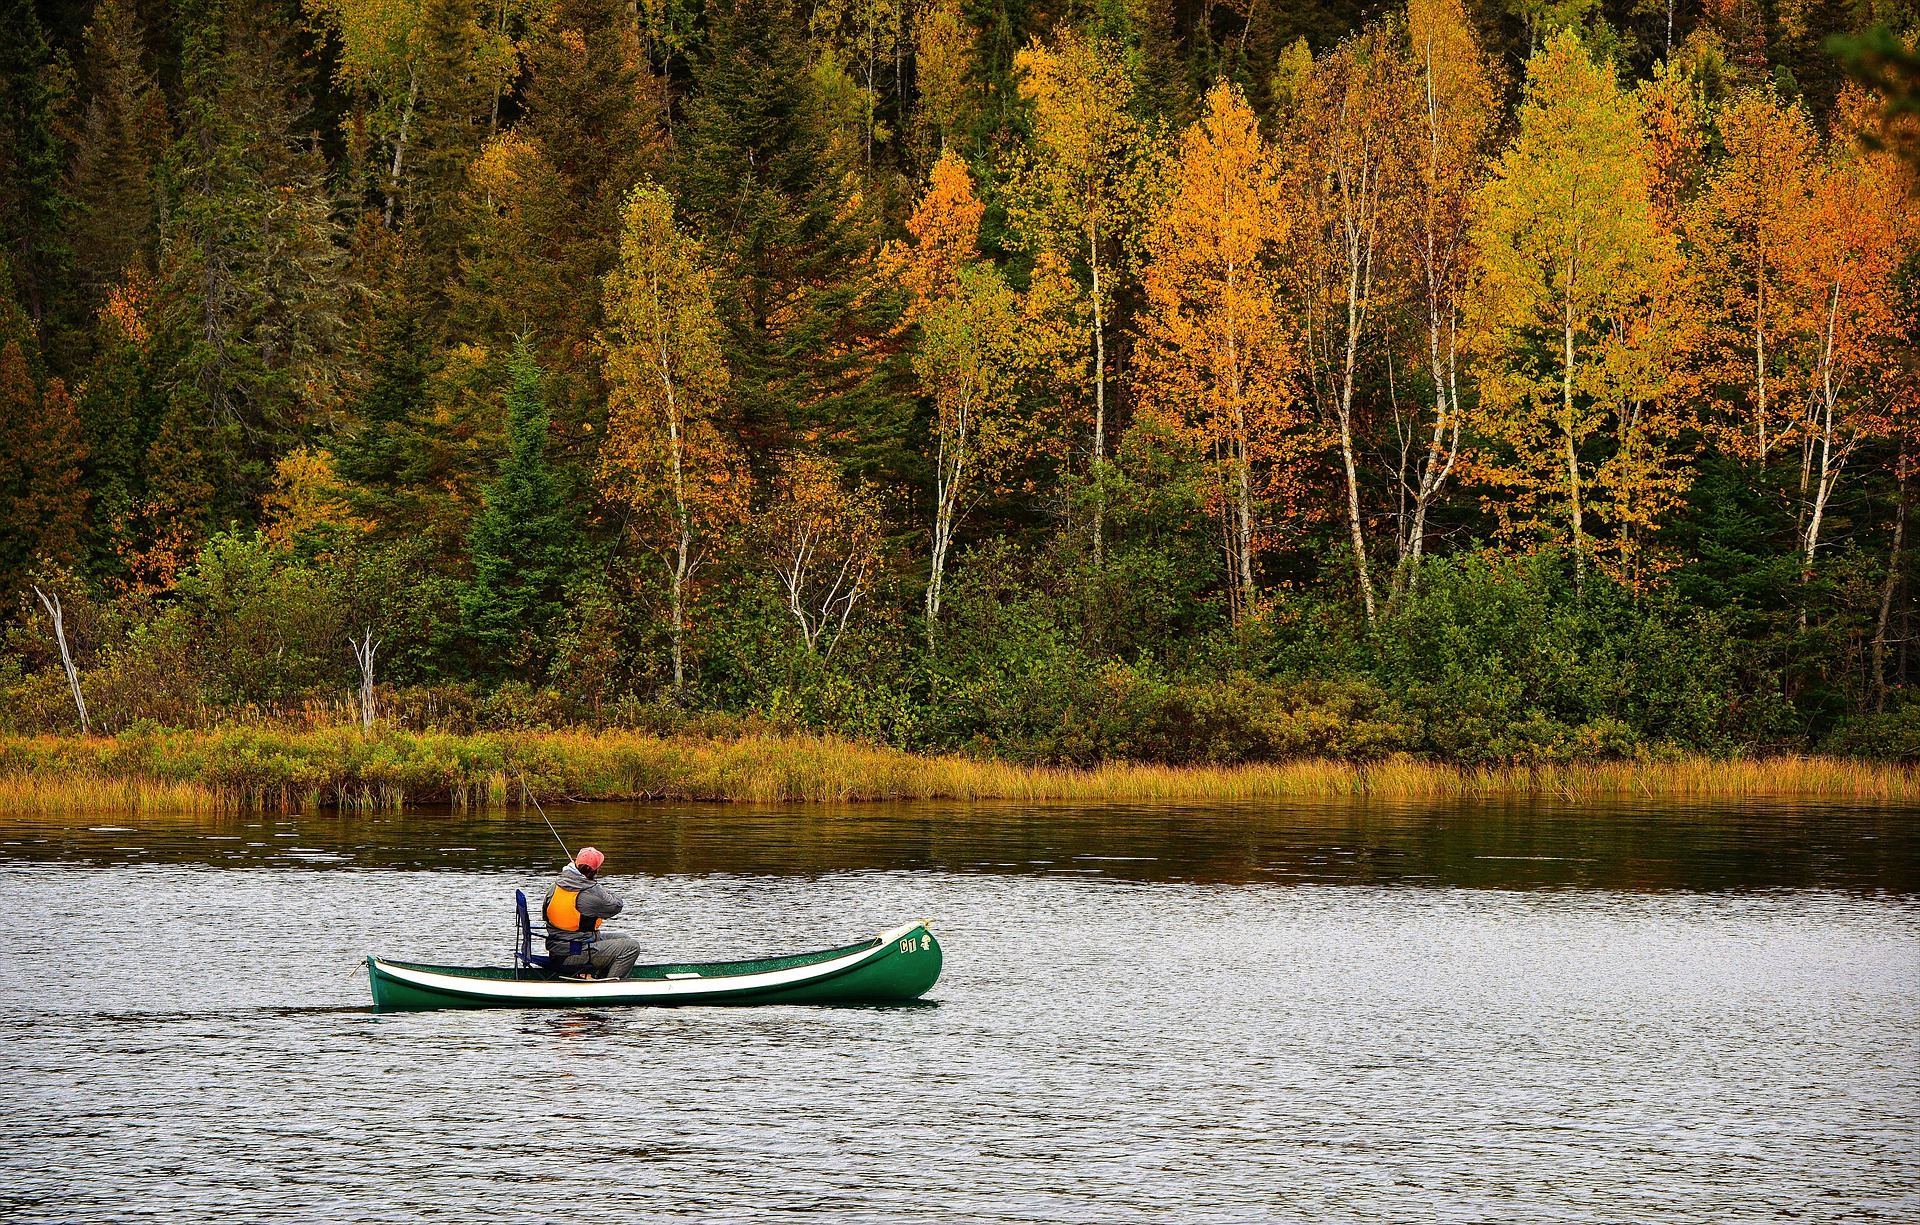 Fishing in a canoe on a fall day.